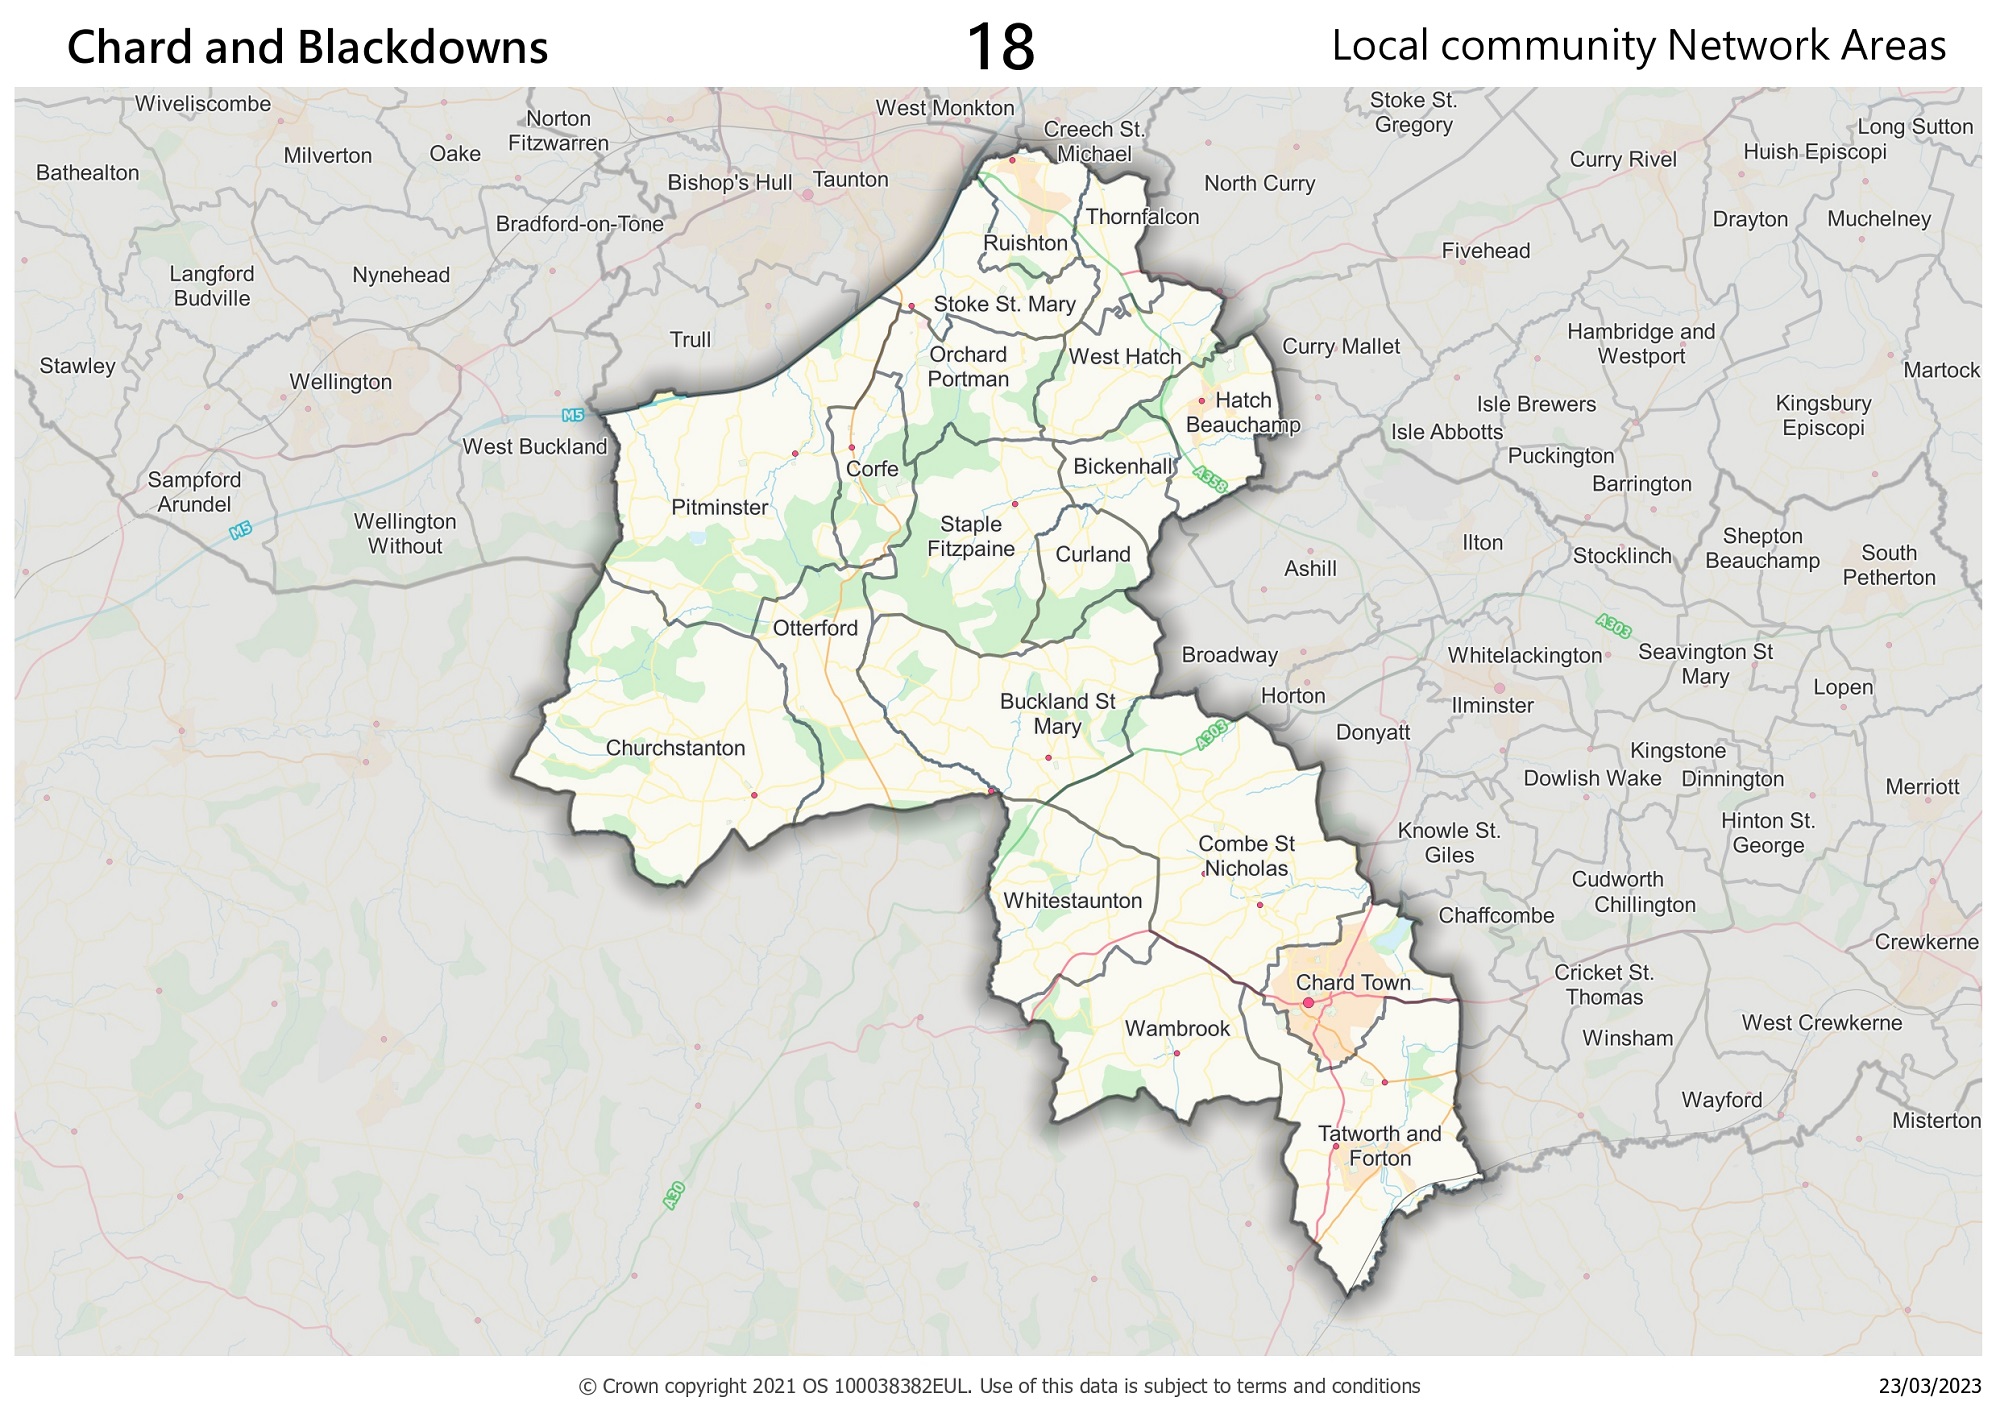 Chard and Blackdowns local community networks area map